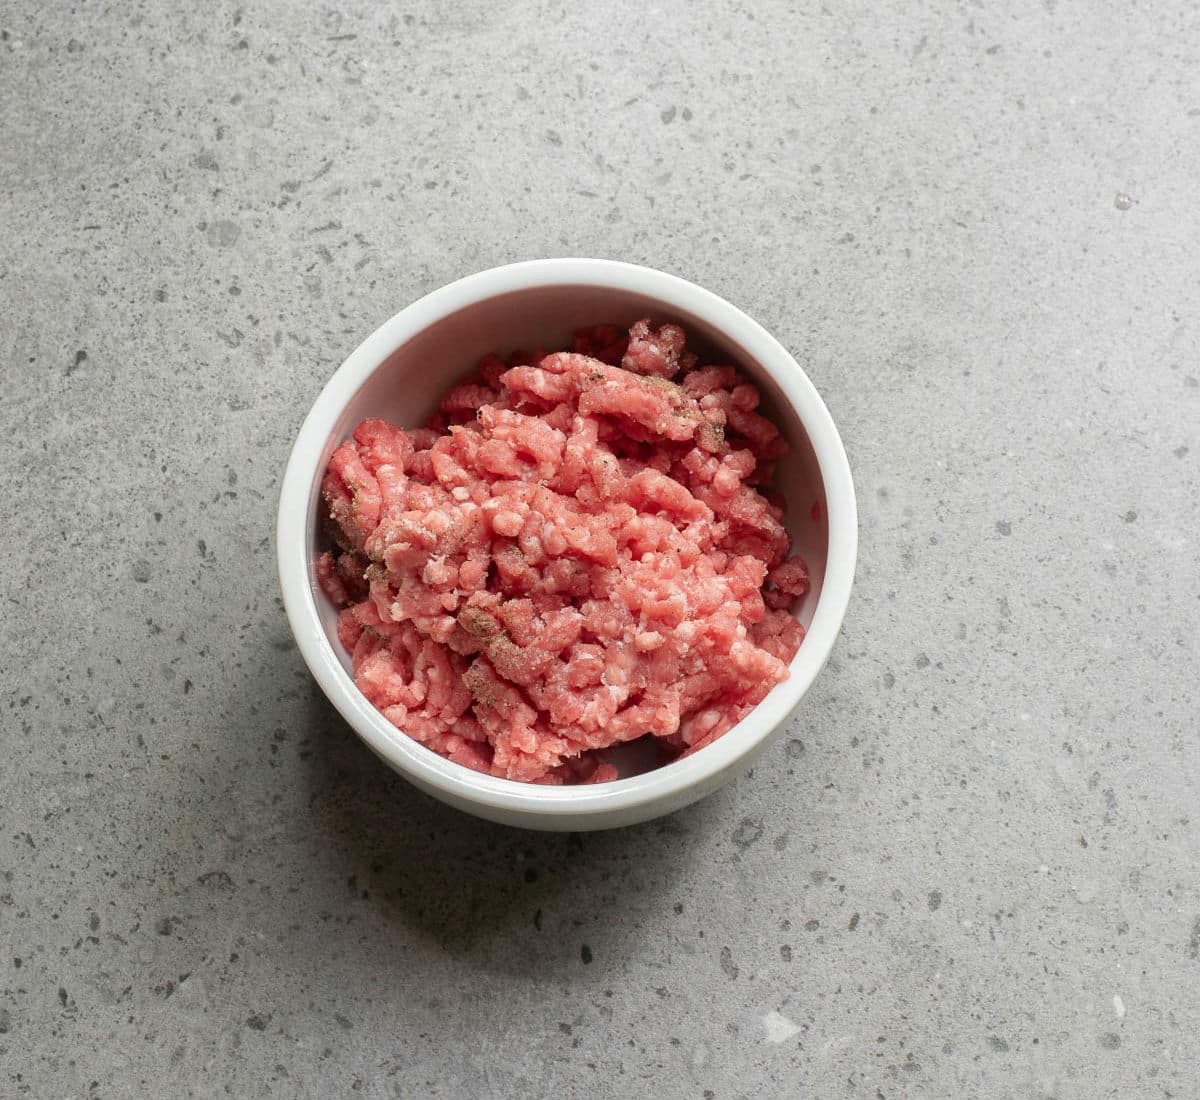 Ground beef in white bowl on gray counter.